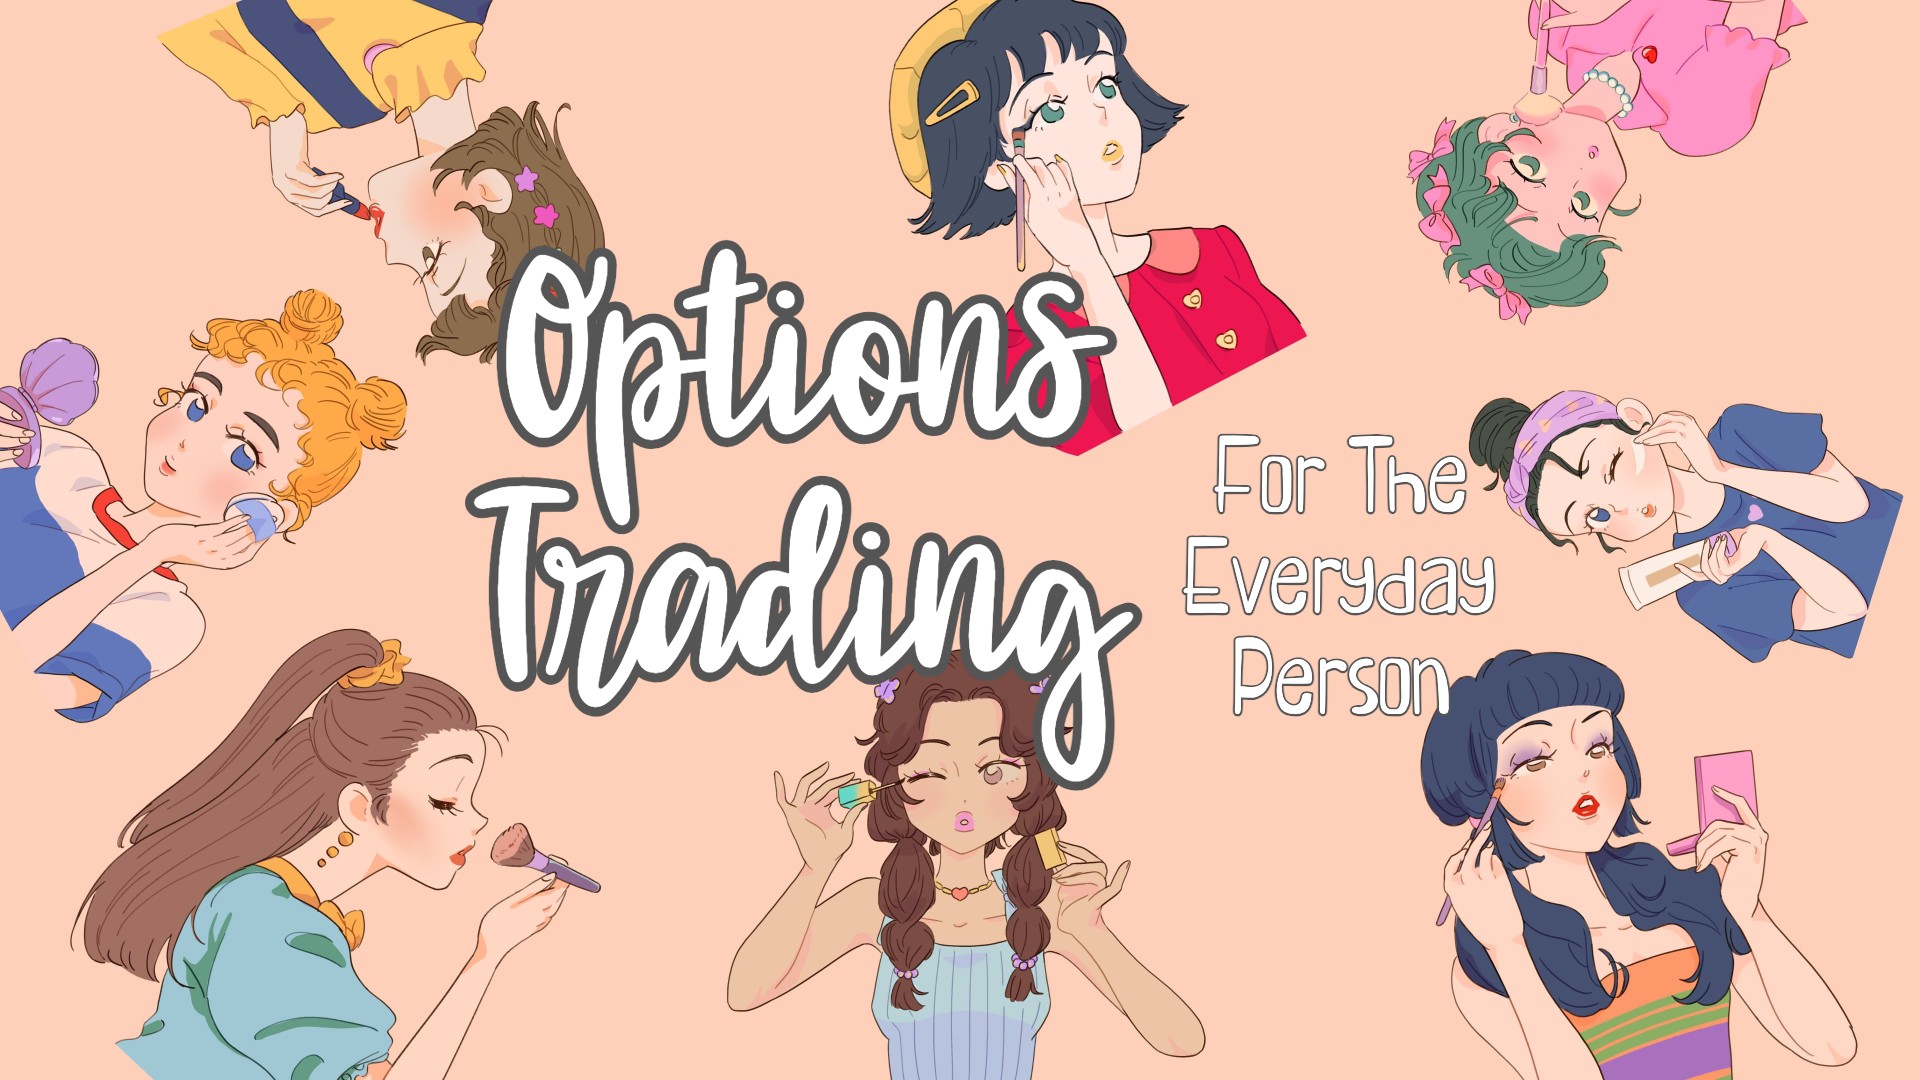 Options Trading for the Everyday Person